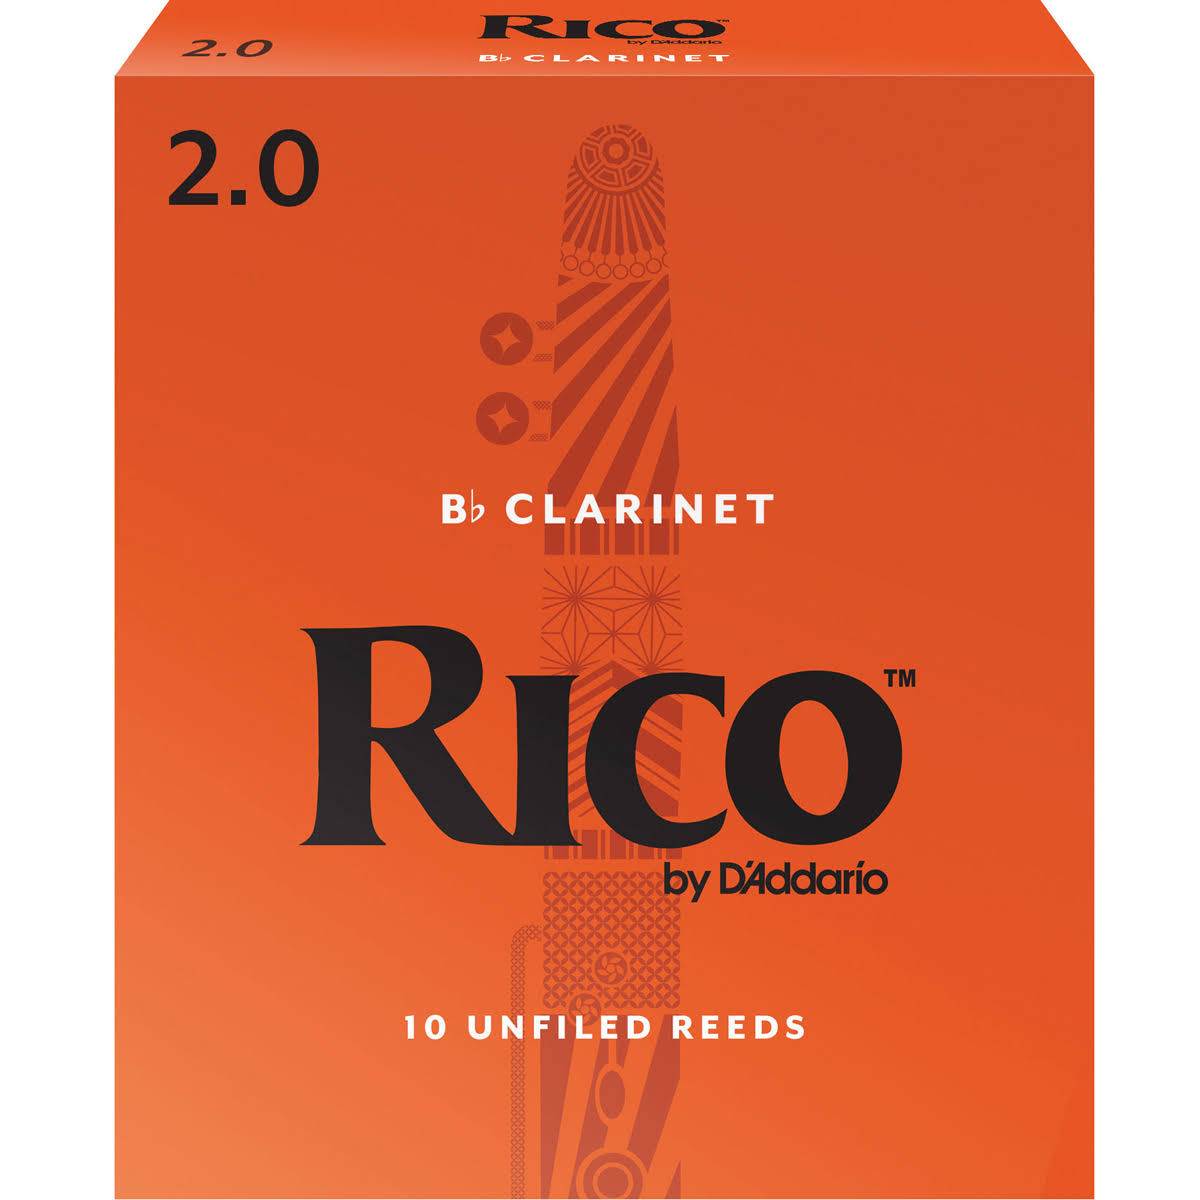 Rico by D'Addario Bb Clarinet Reeds - Strength 2.0, 10 Unfiled Reeds